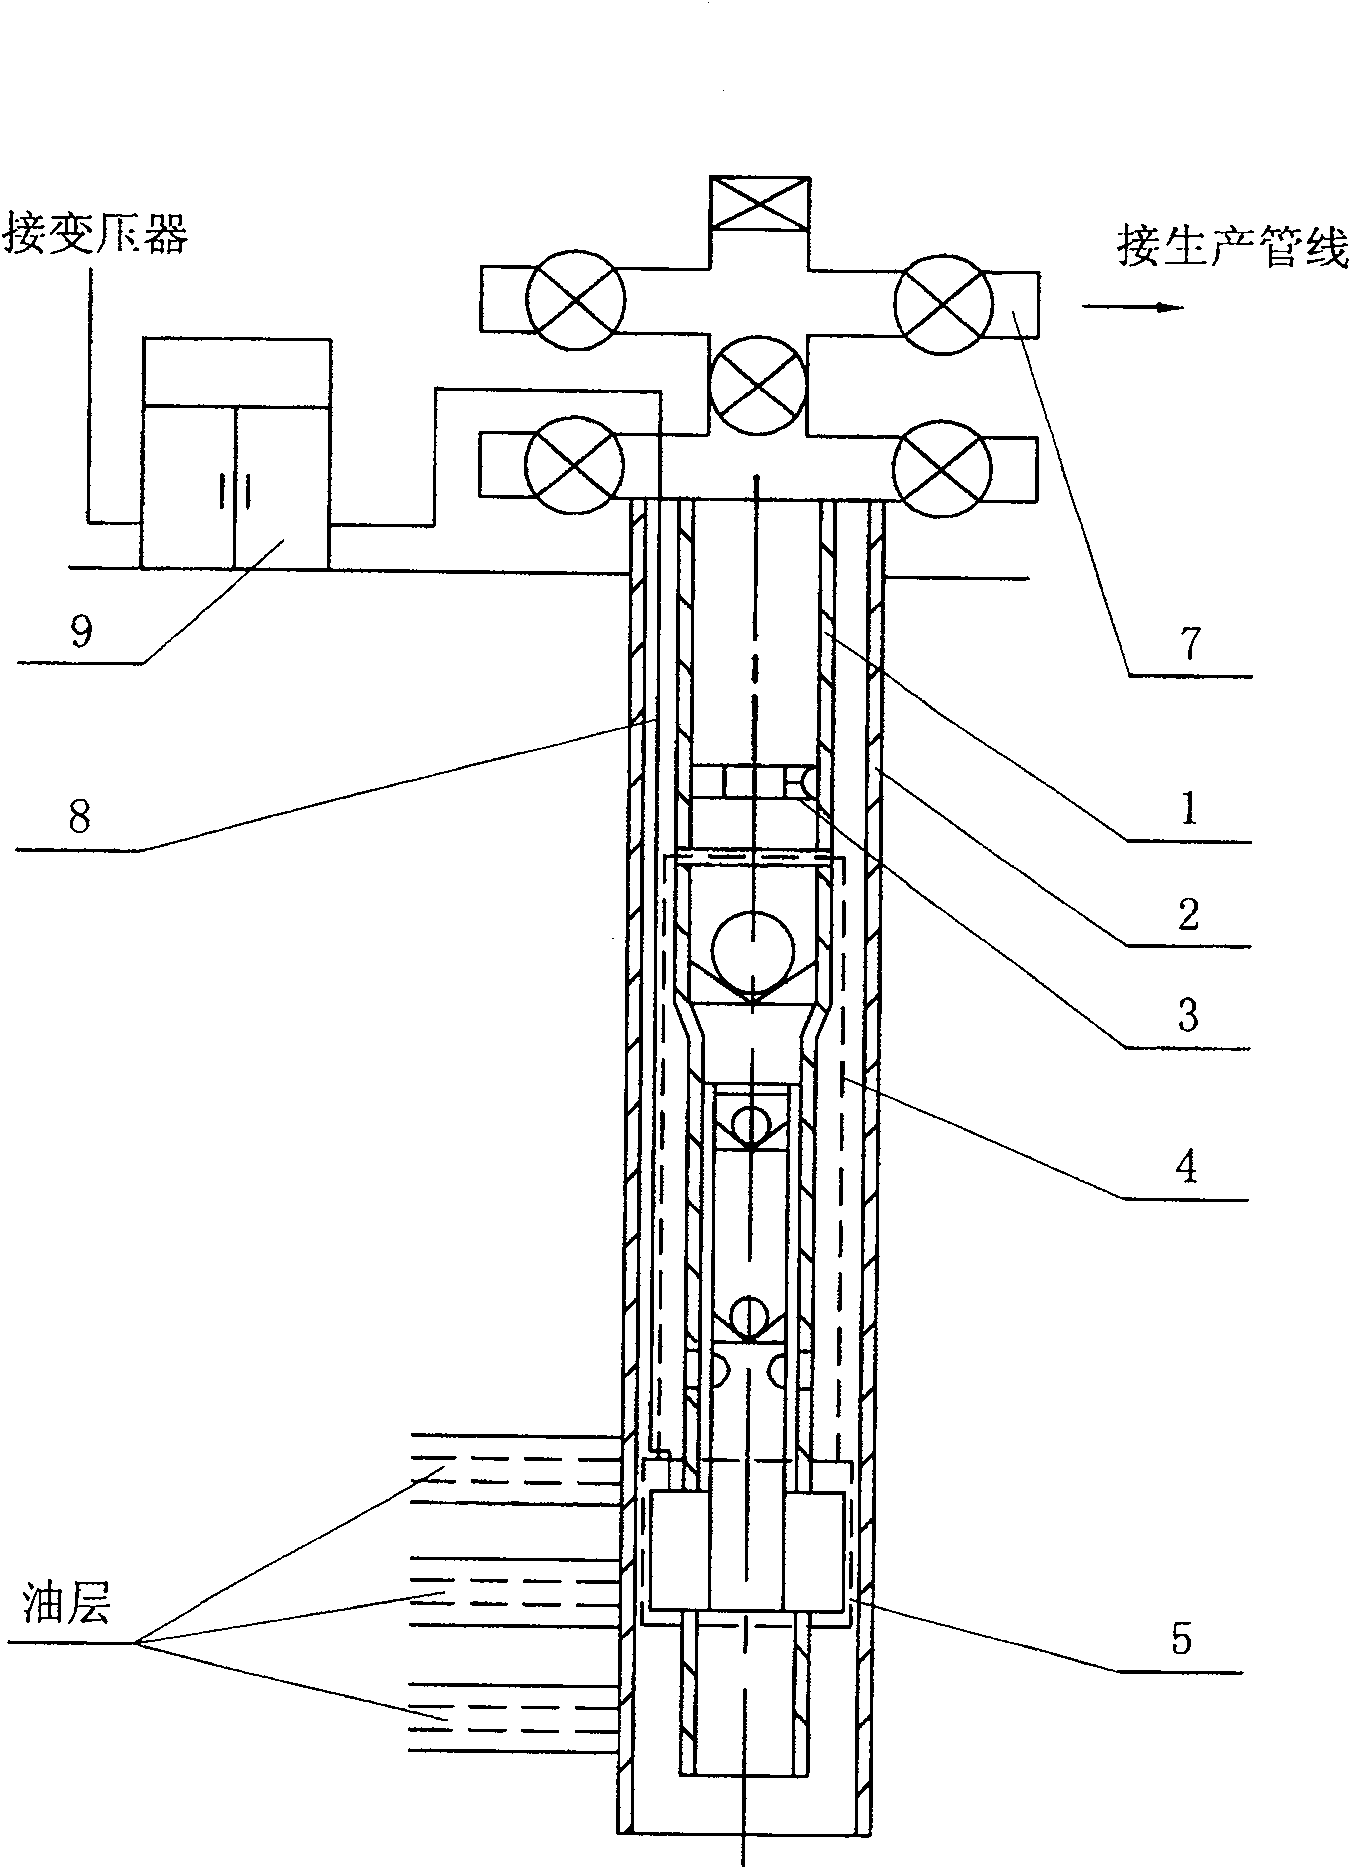 Oil production system of reciprocating submersible electric pump driven by sand-proof linear motor